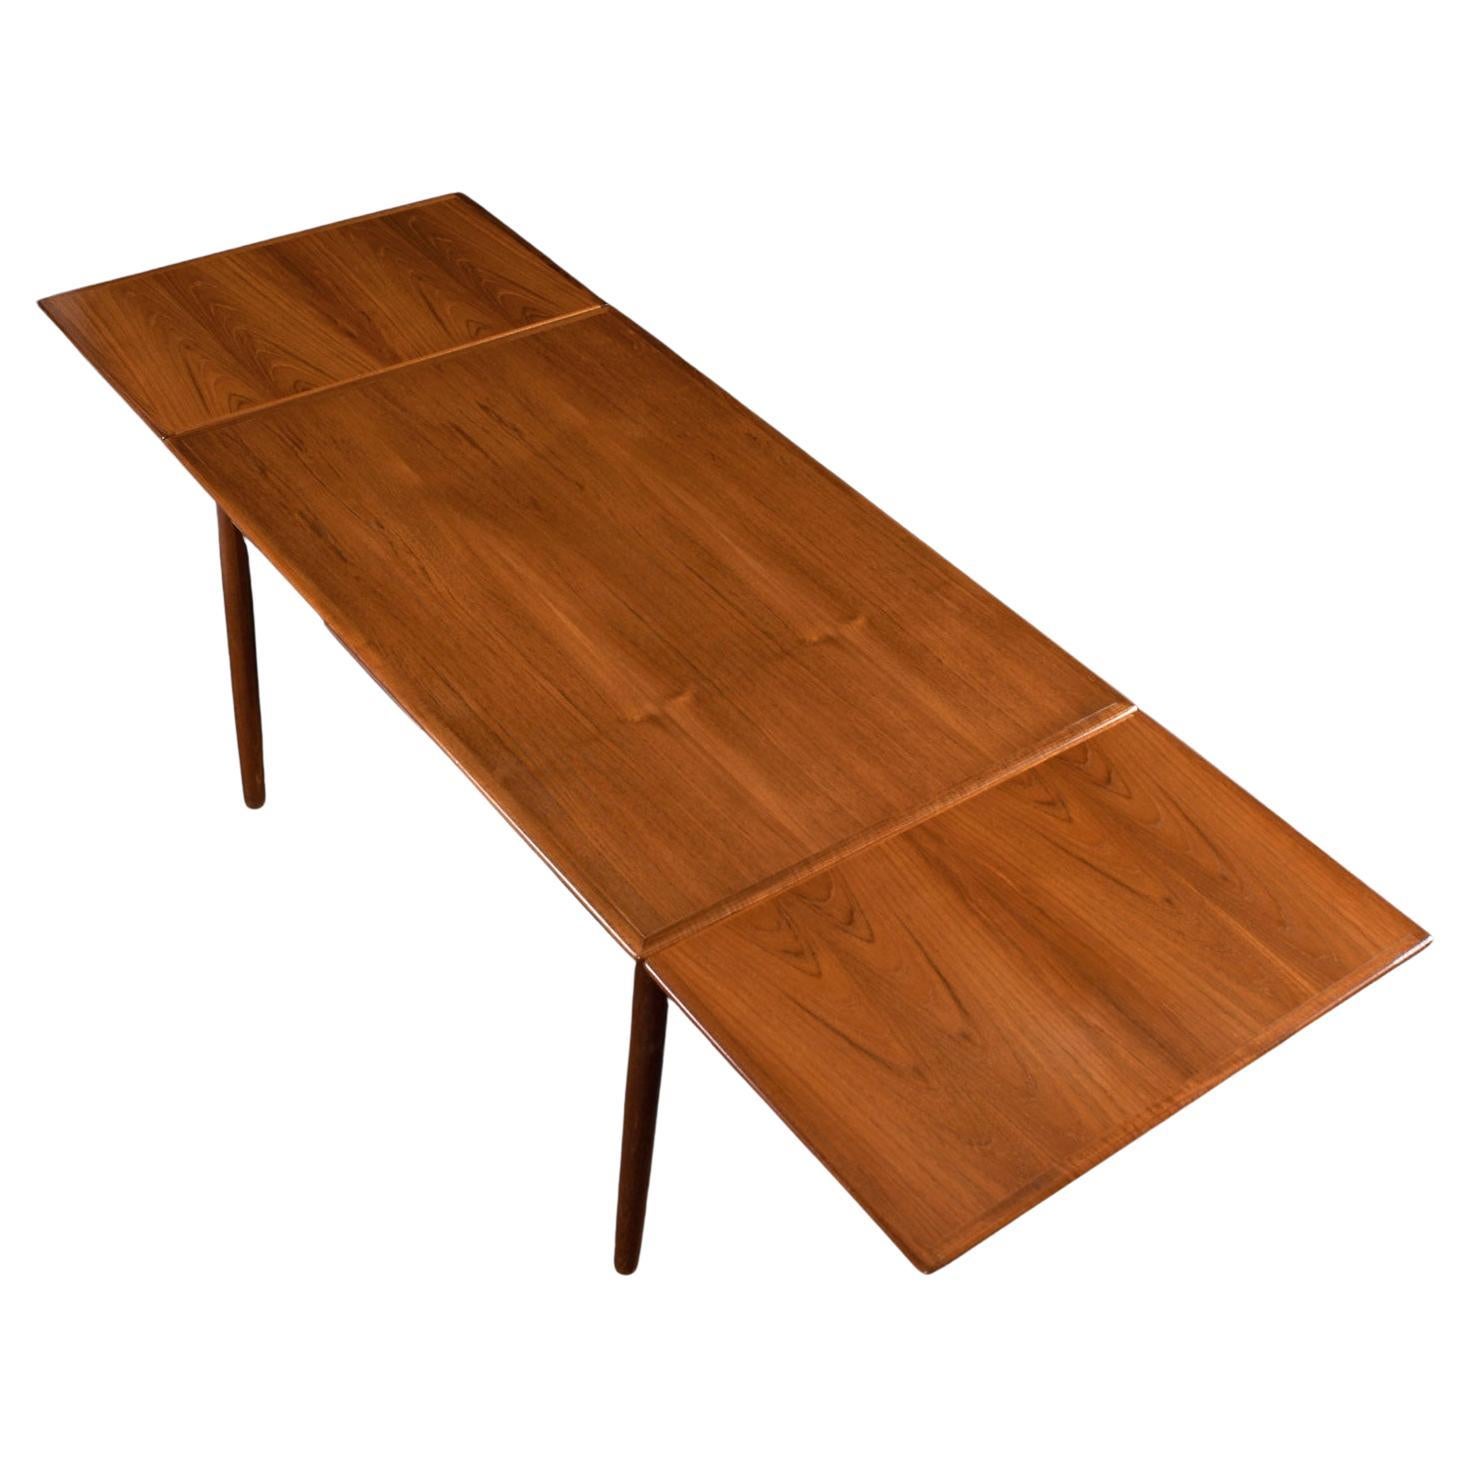 Gently restored by our in-house team. The top needed re-finishing but the leaves were left in original condition. More than likely, the leaves were rarely used. 

Perfect for smaller spaces, this medium sized Mid-Century Modern Danish teak dining